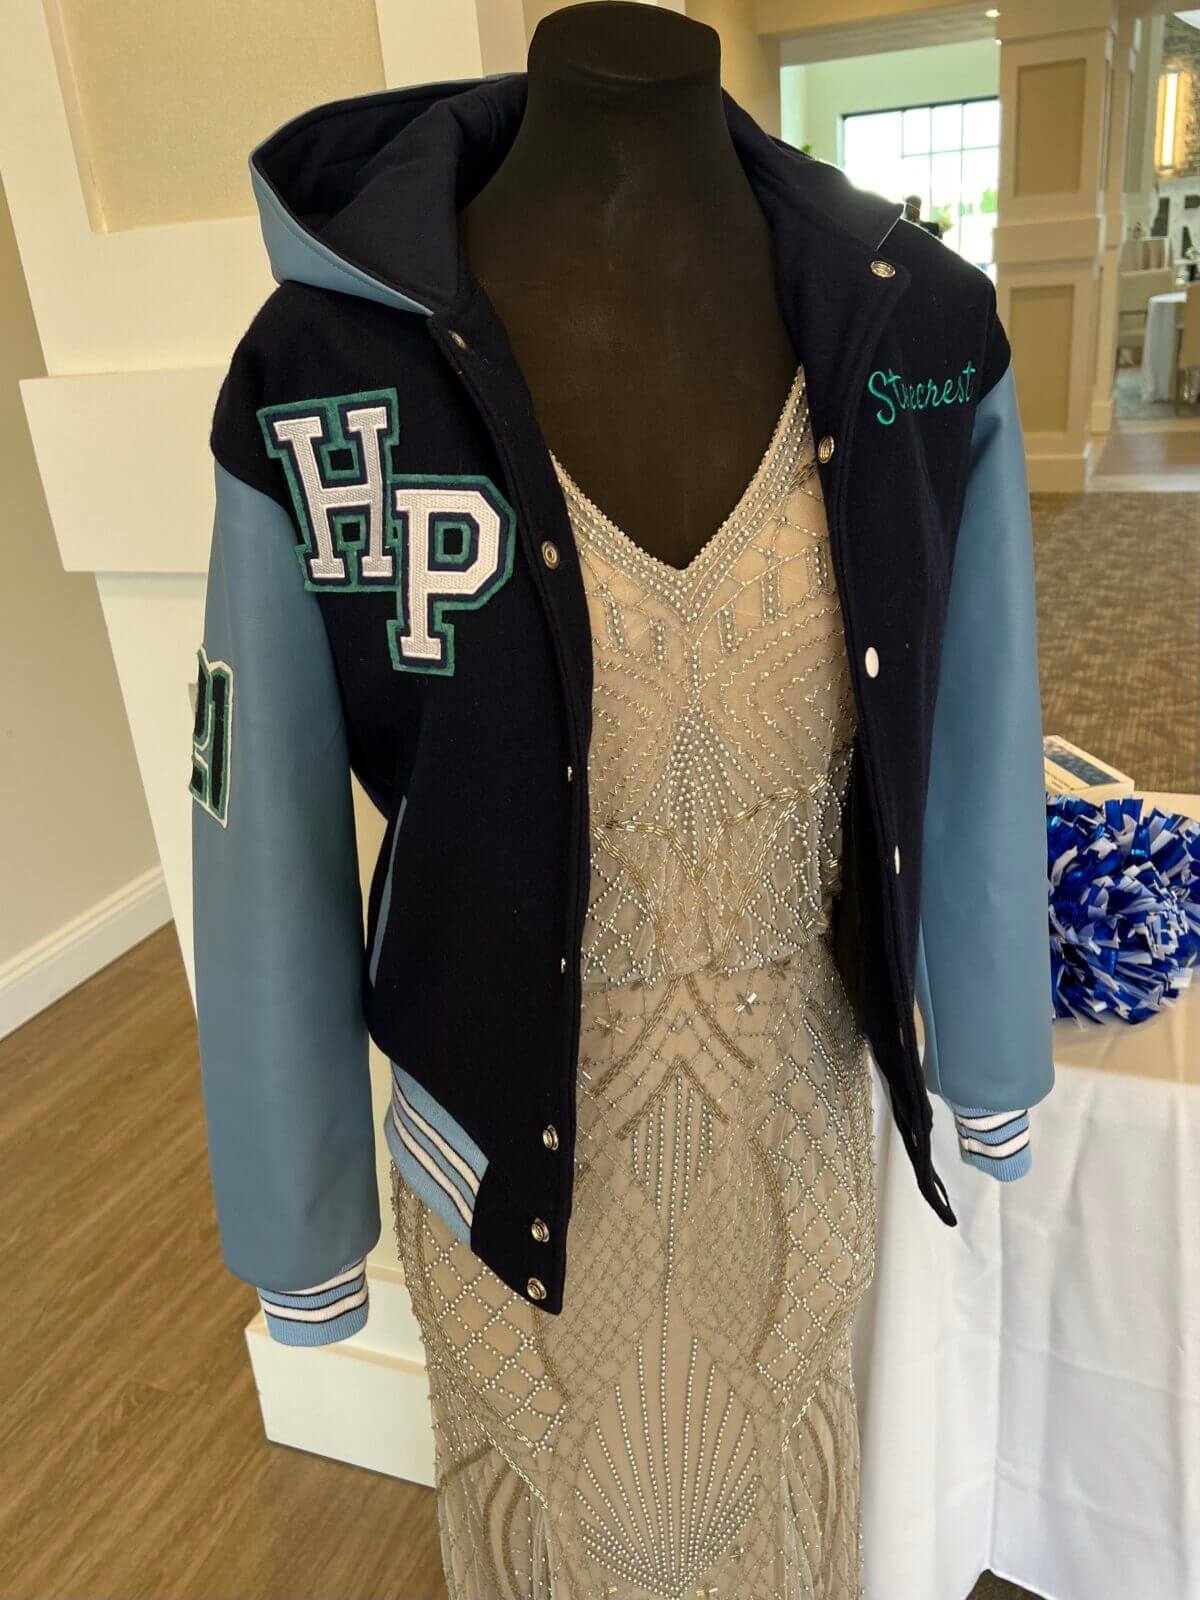 mannequin displaying dress and letter jacket